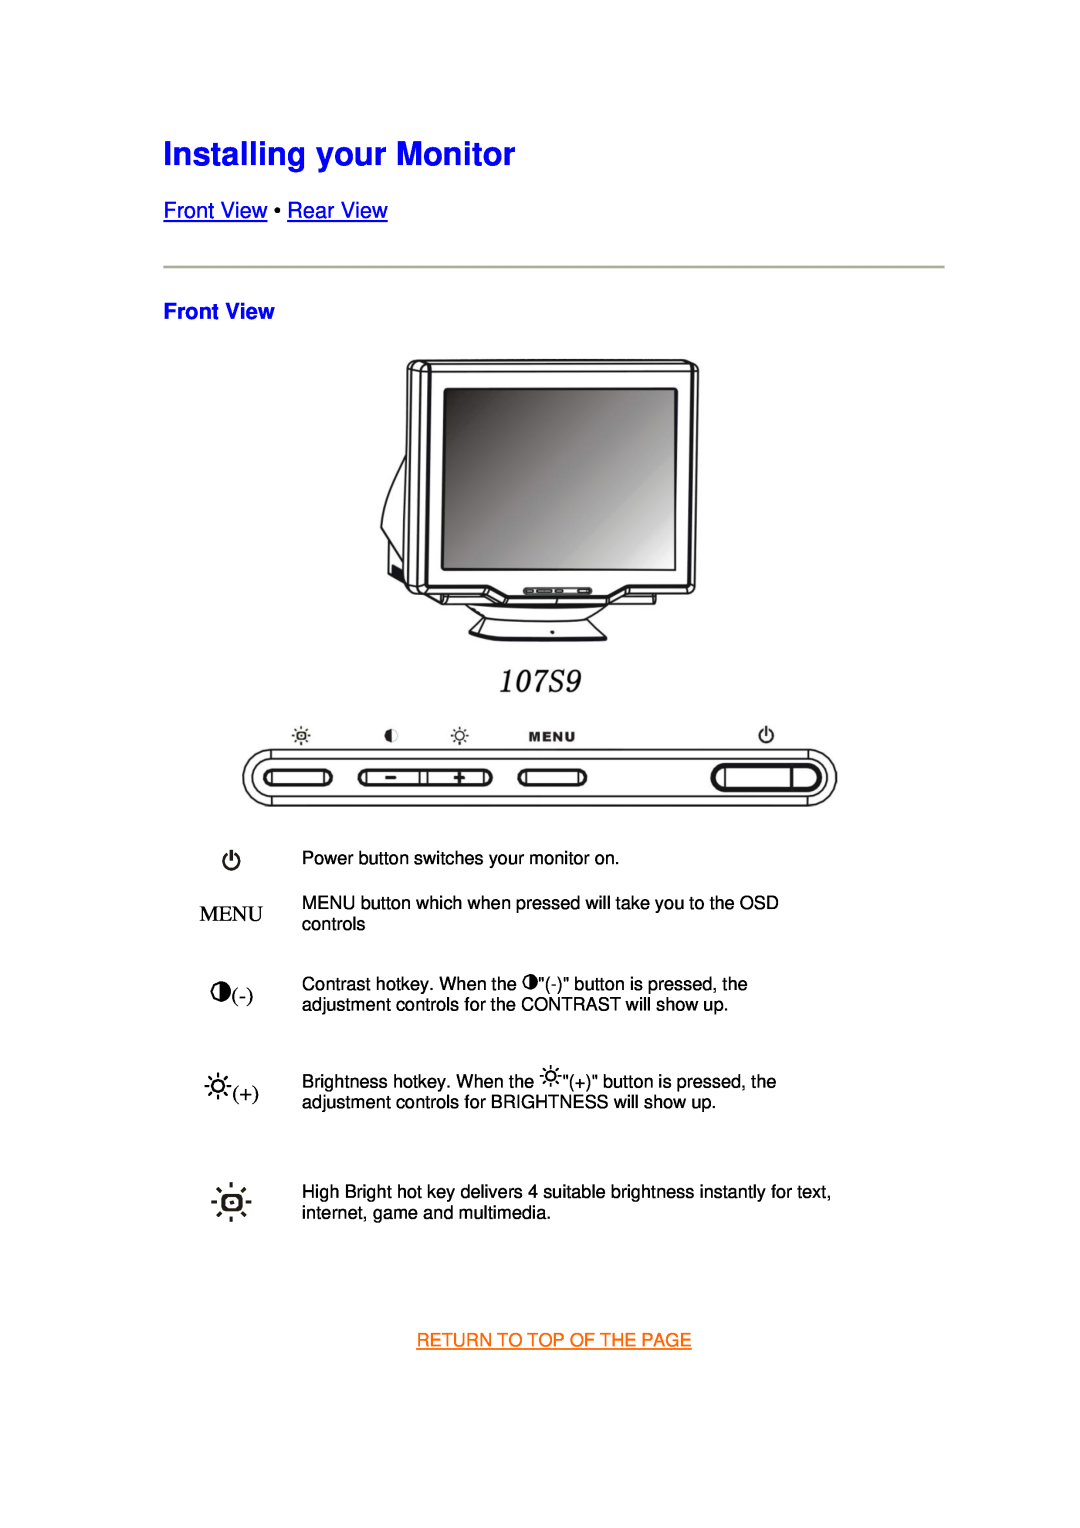 Philips 107S9 manual Installing your Monitor, Front View Rear View, Return To Top Of The Page, Menu 